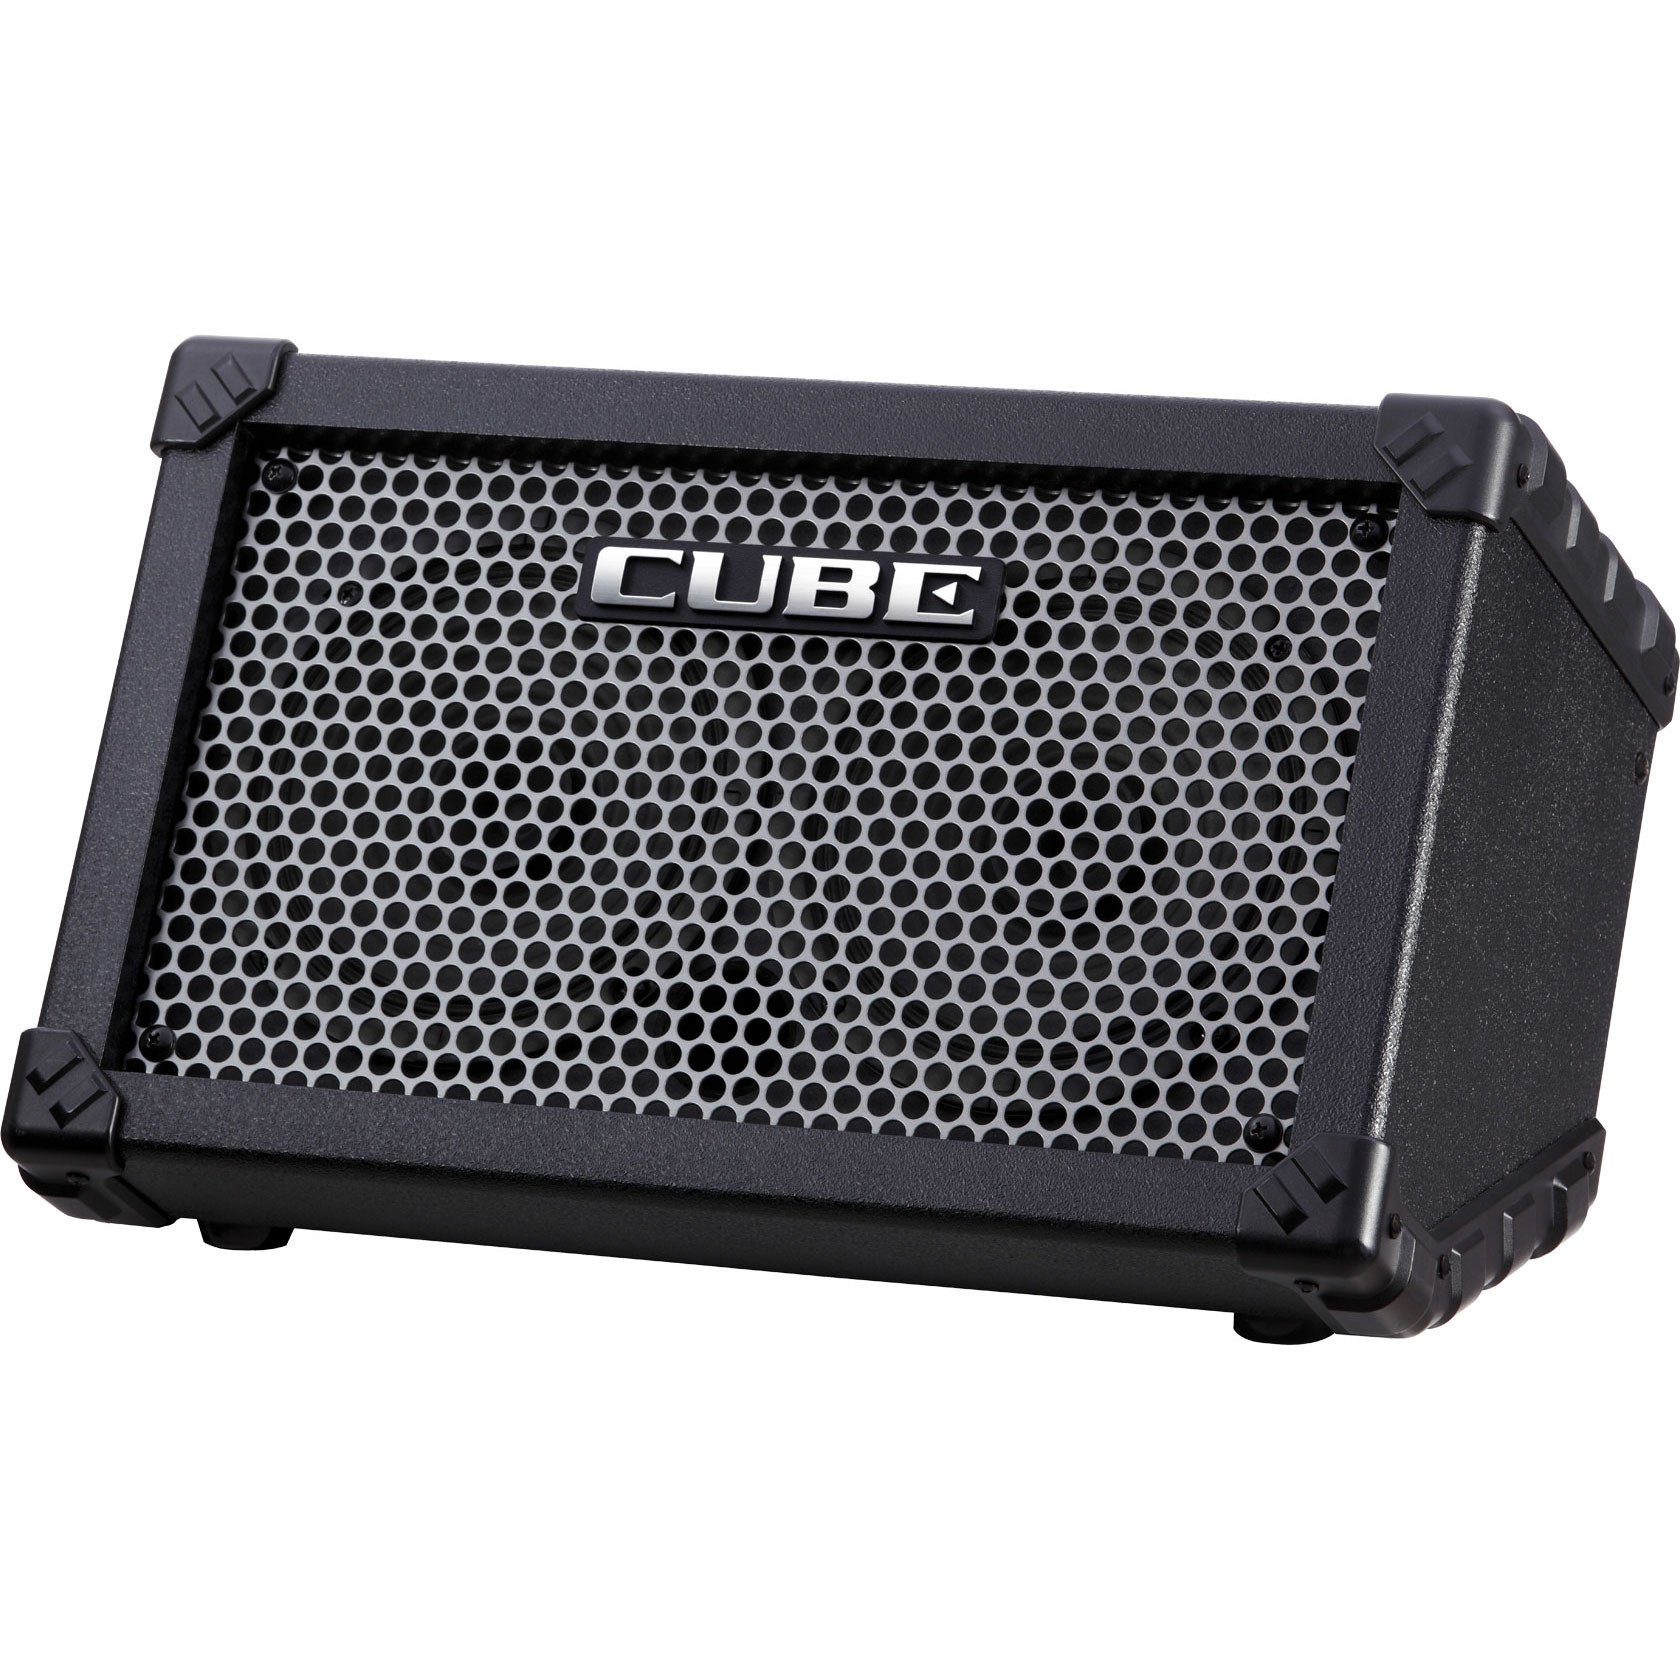 roland cube street amp review